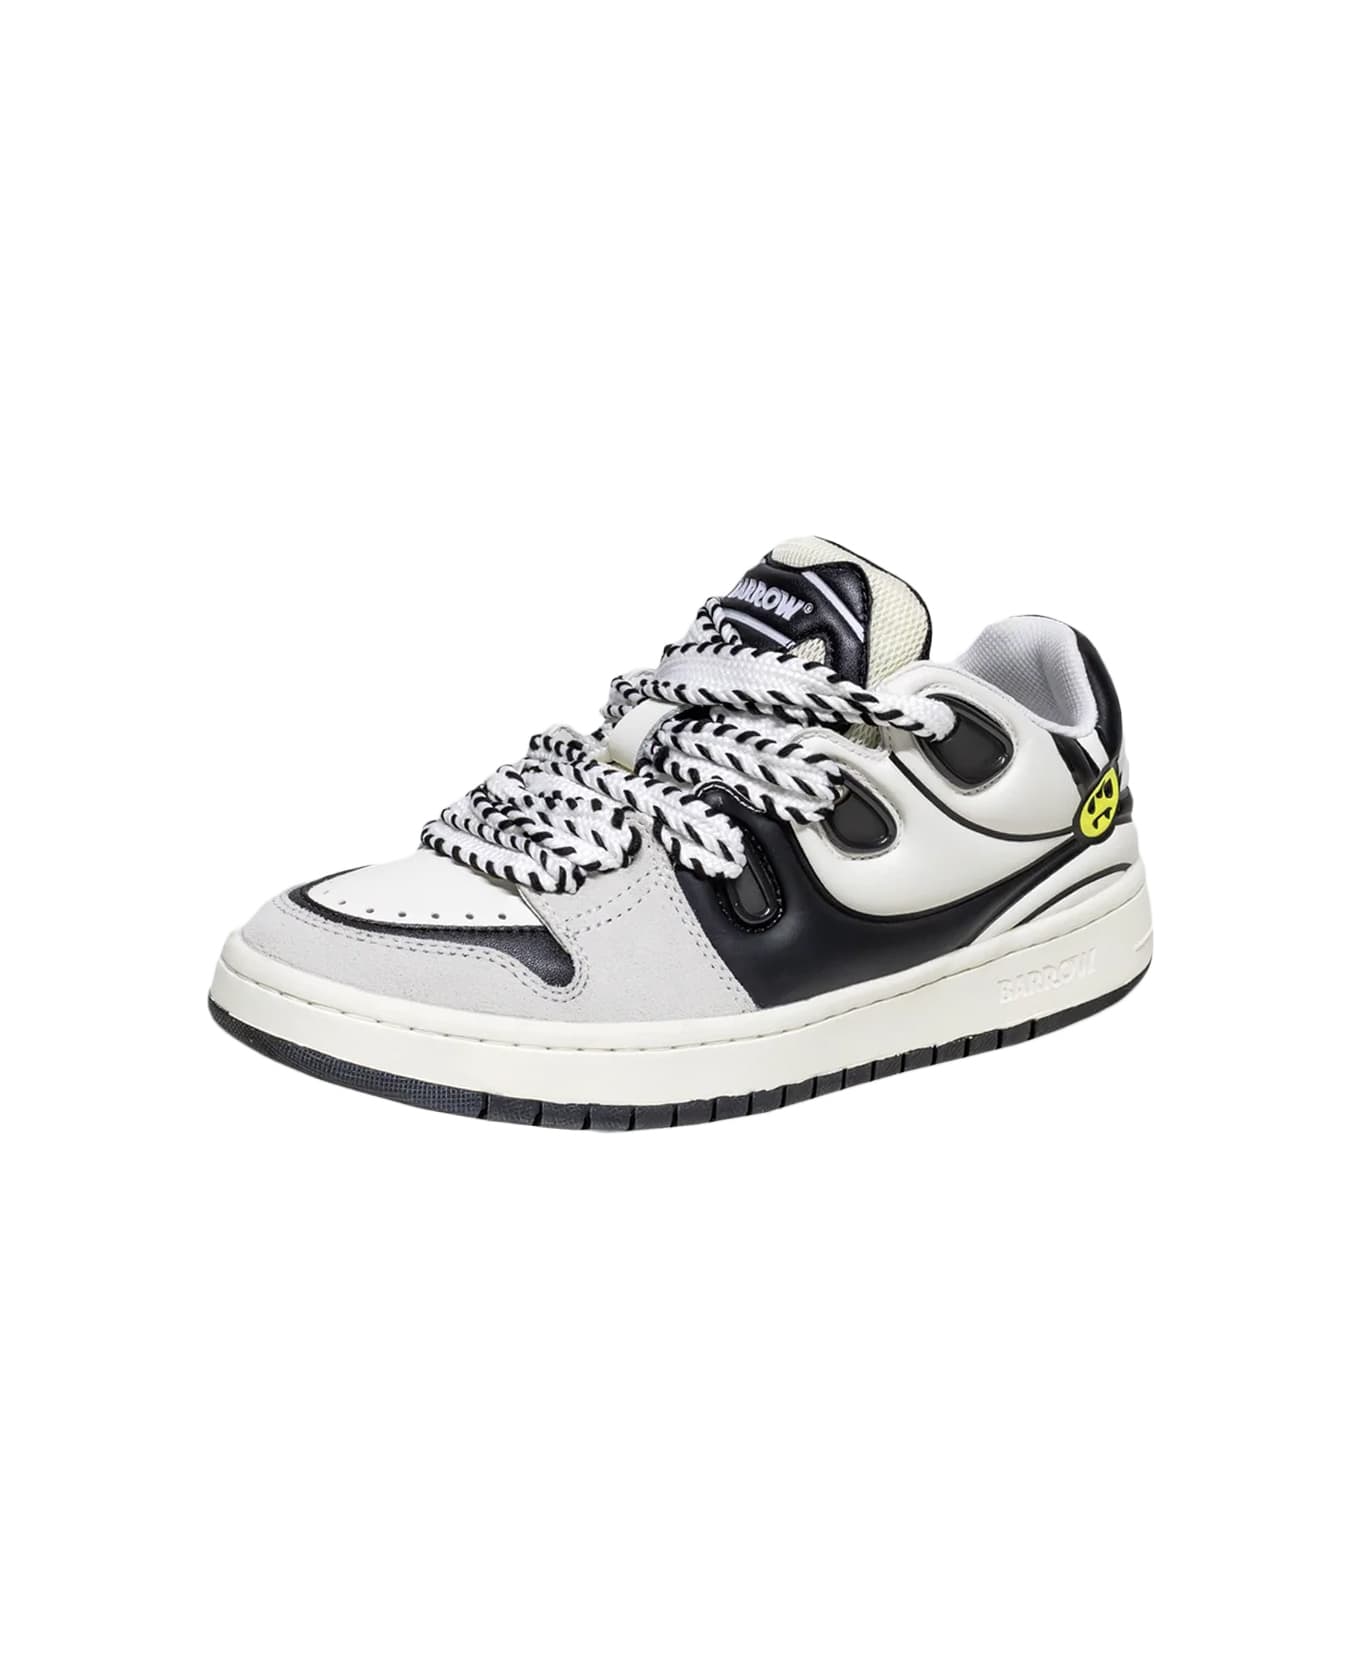 Barrow White And Black Ollie Sneakers - Black